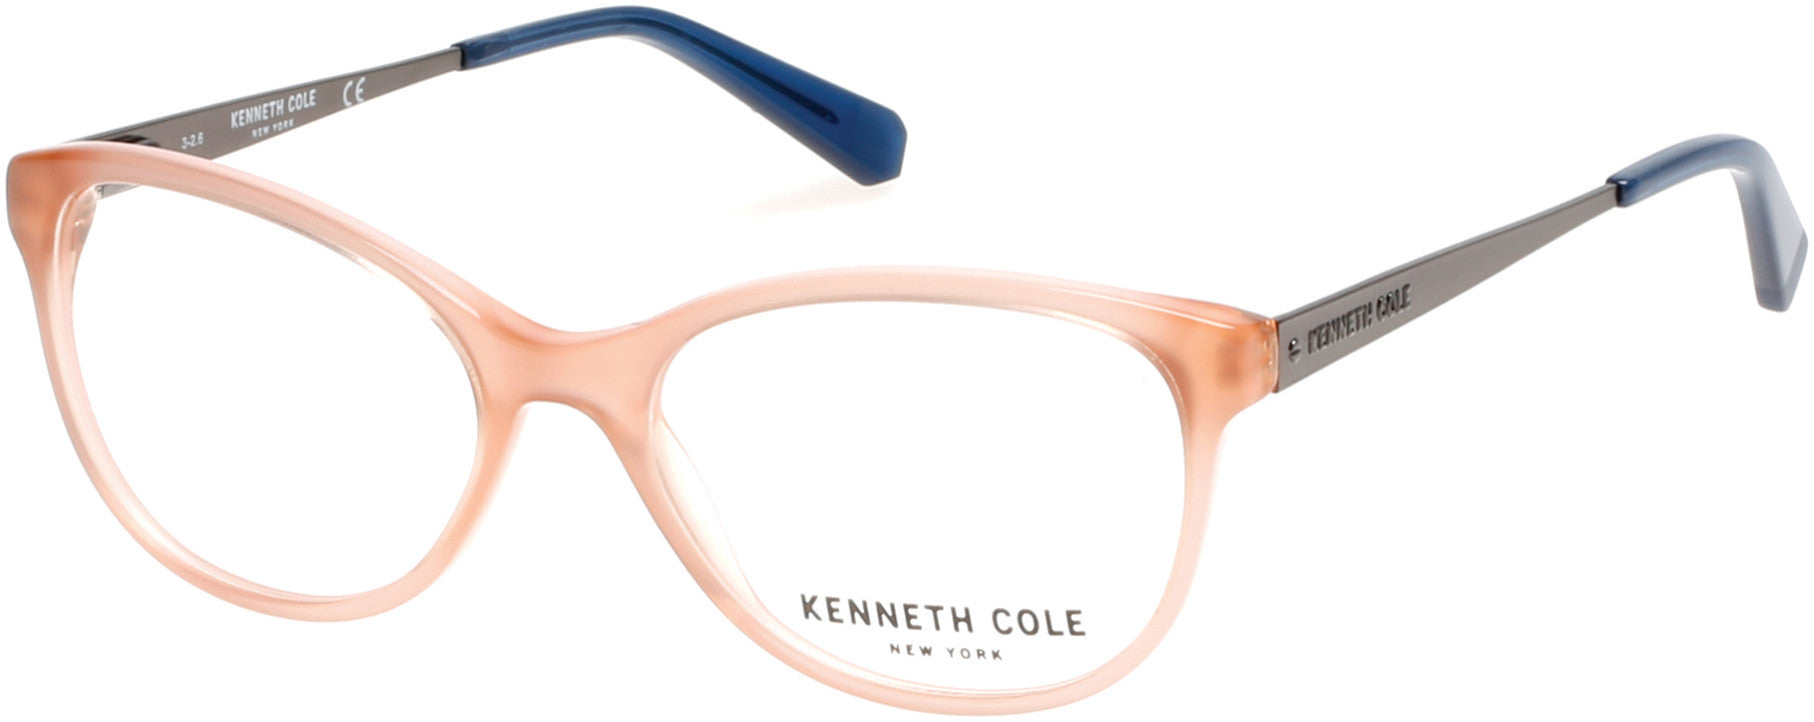 Kenneth Cole New York,Kenneth Cole Reaction KC0265 Eyeglasses 074-074 - Pink /other